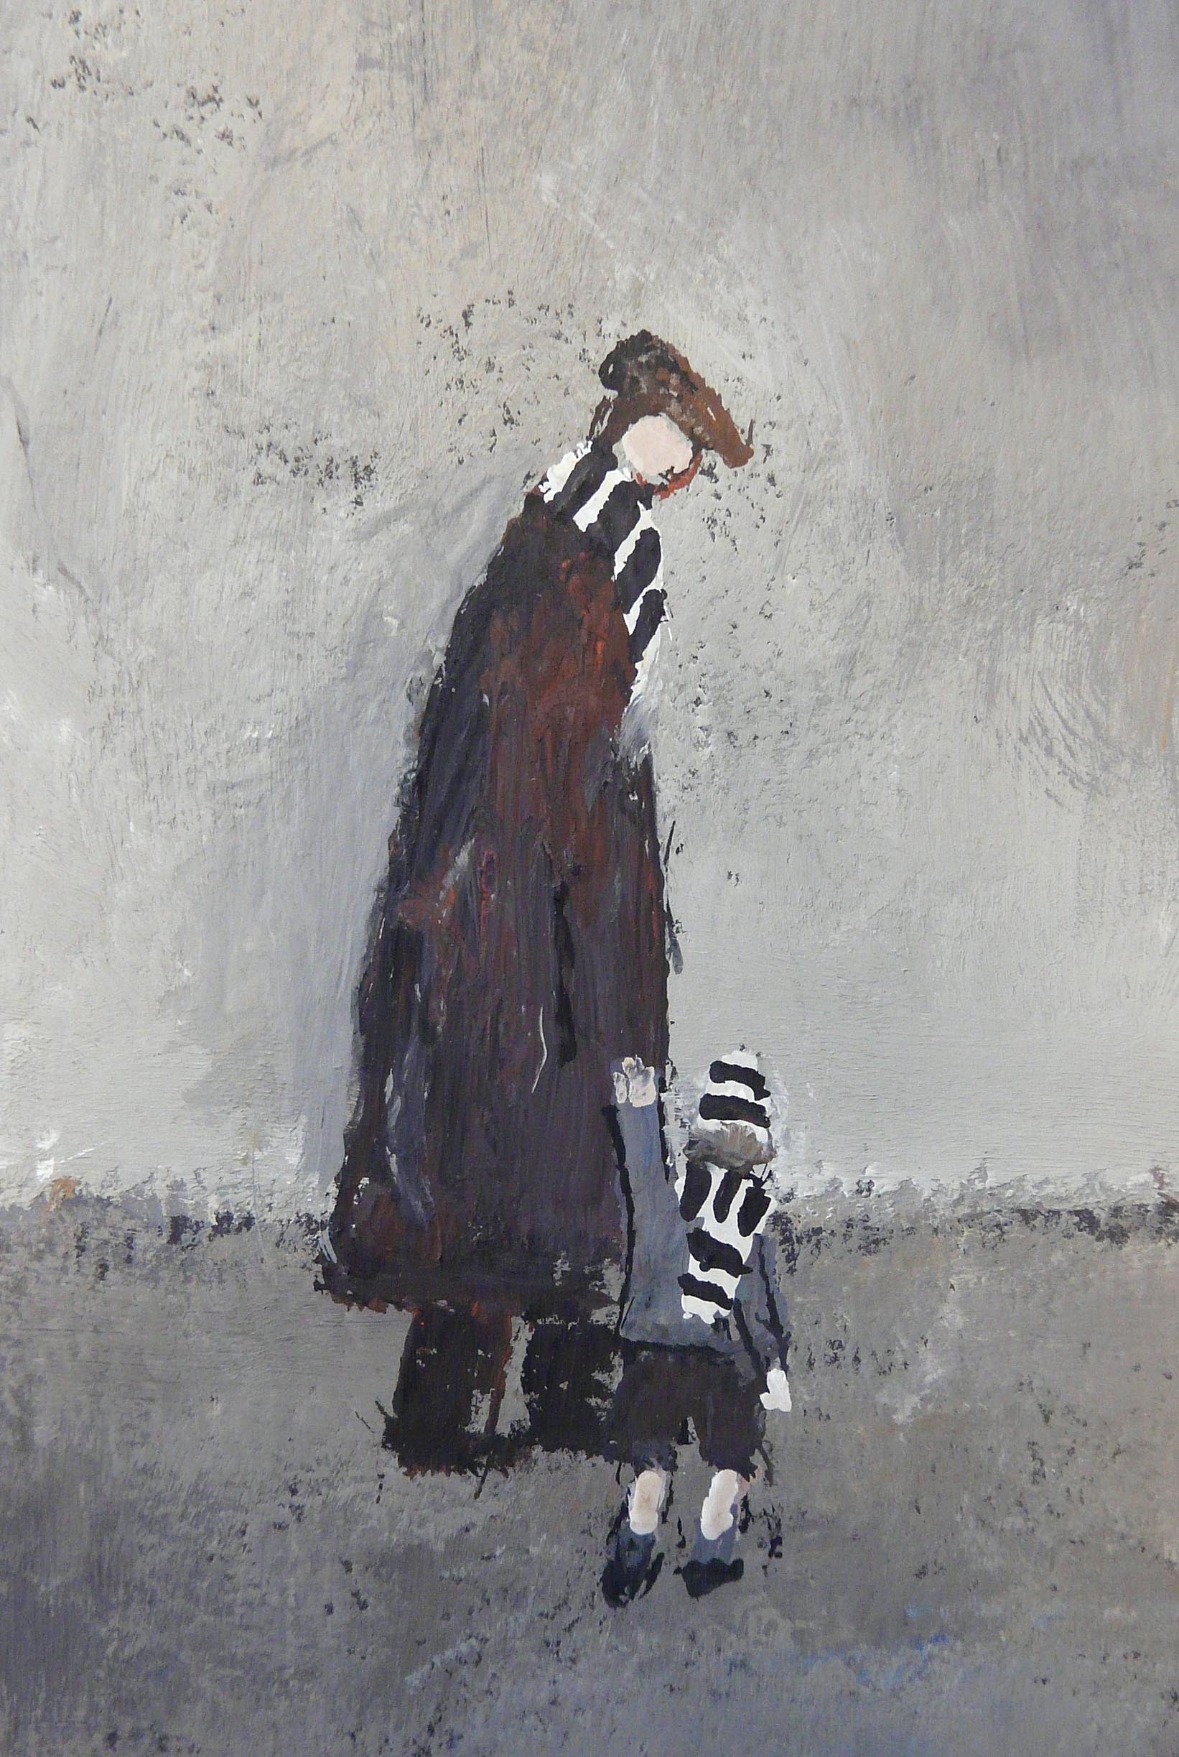 First Match by Malcolm Teasdale